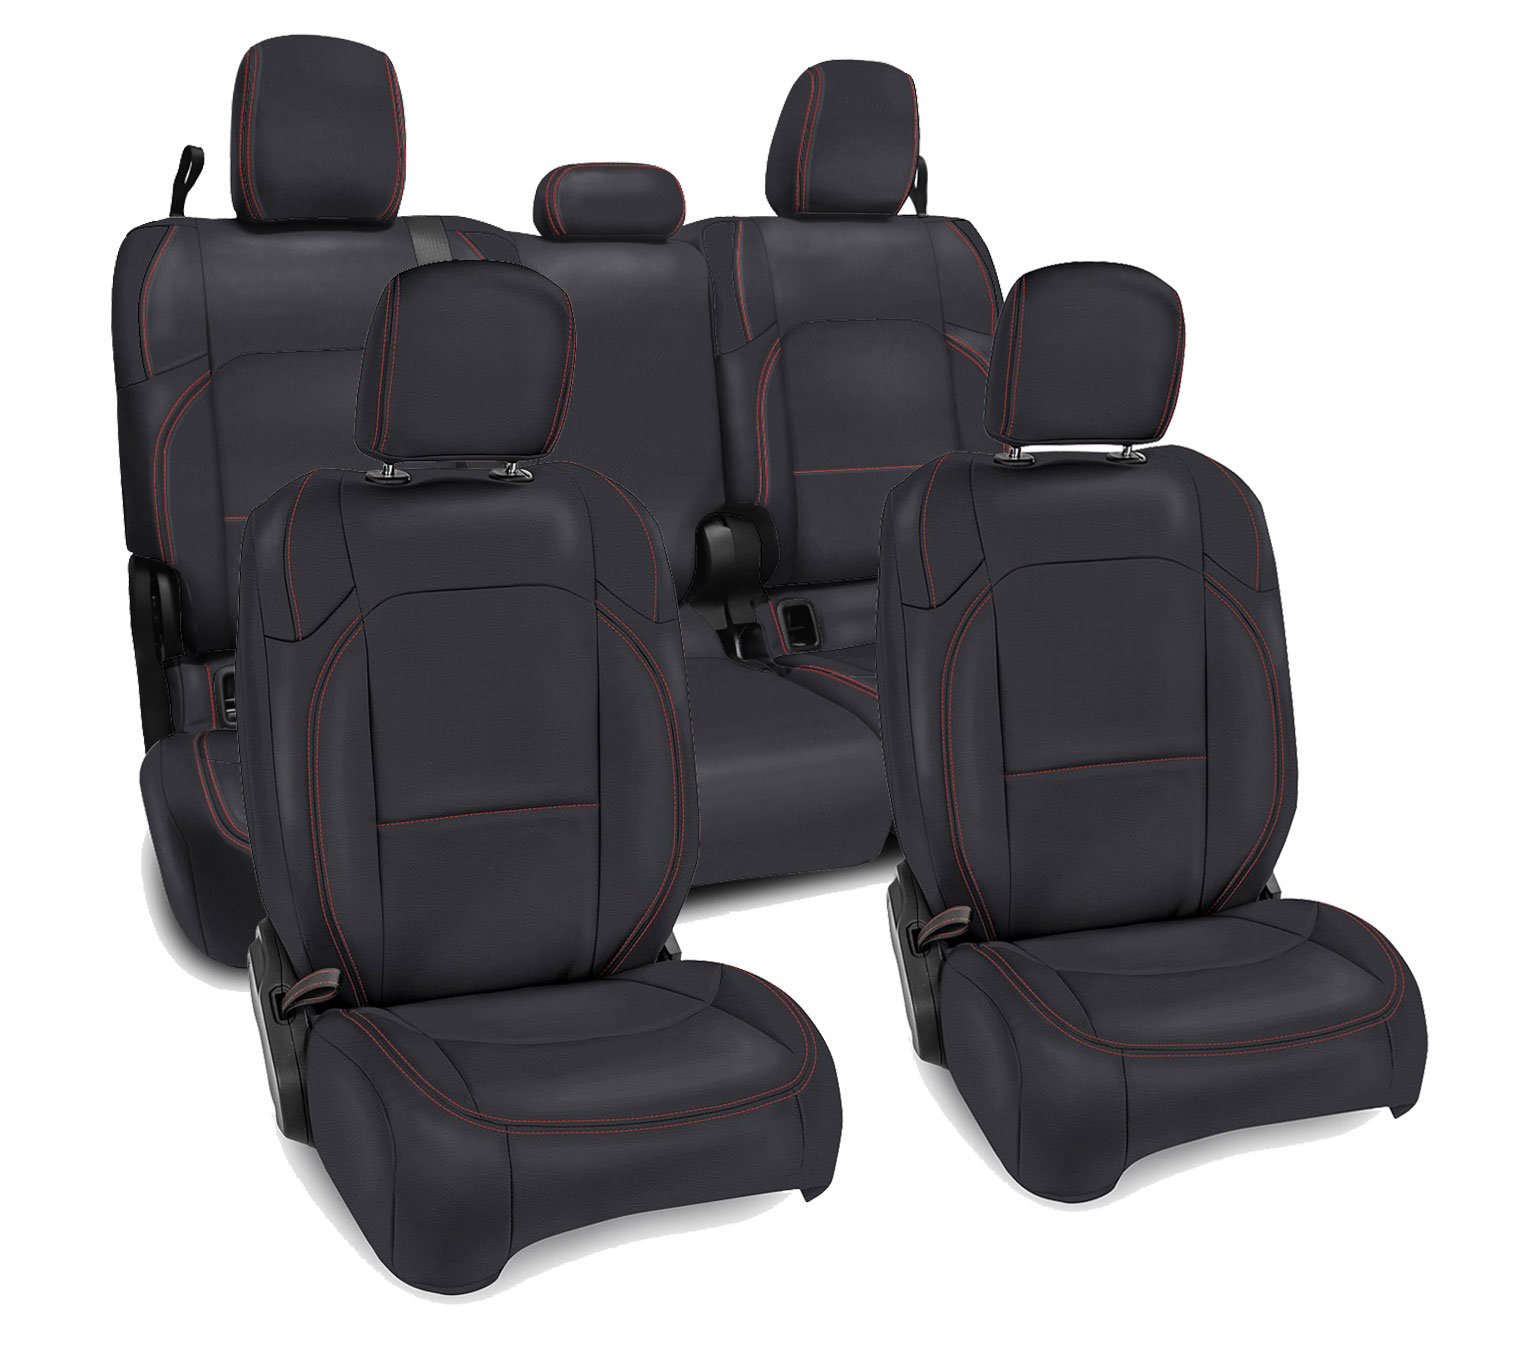 https://www.quadratec.com/sites/default/files/styles/product_zoomed/public/product_images/prp-front-rear-seat-covers-jt-no-armrest-black-red-stitching_3.jpg